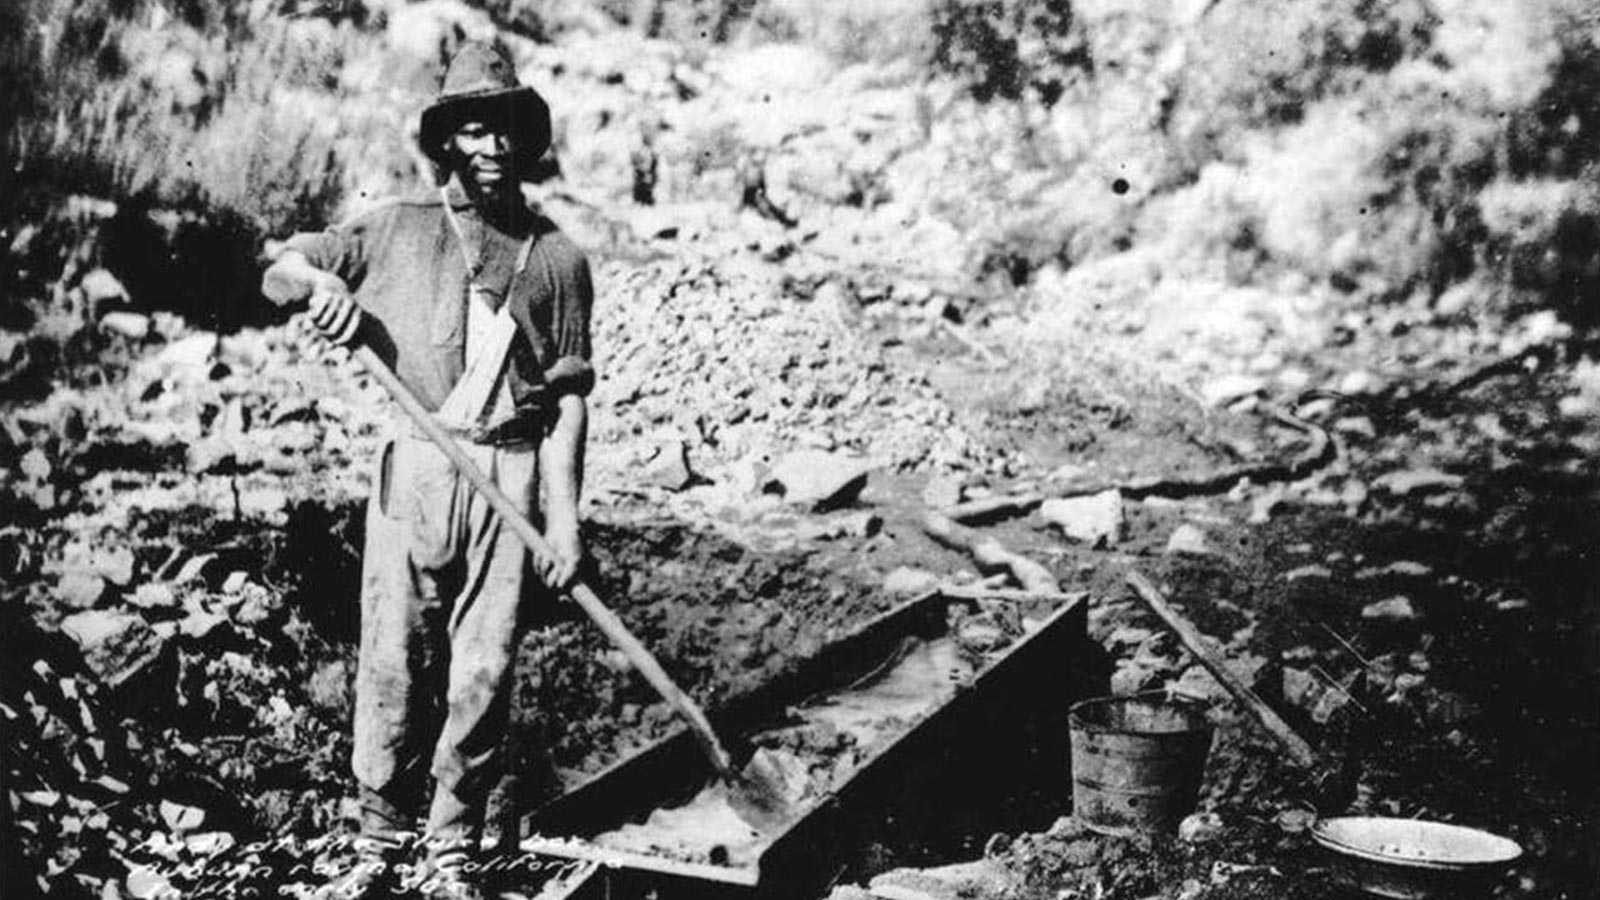 The little-known story of how slavery infiltrated California and the American west